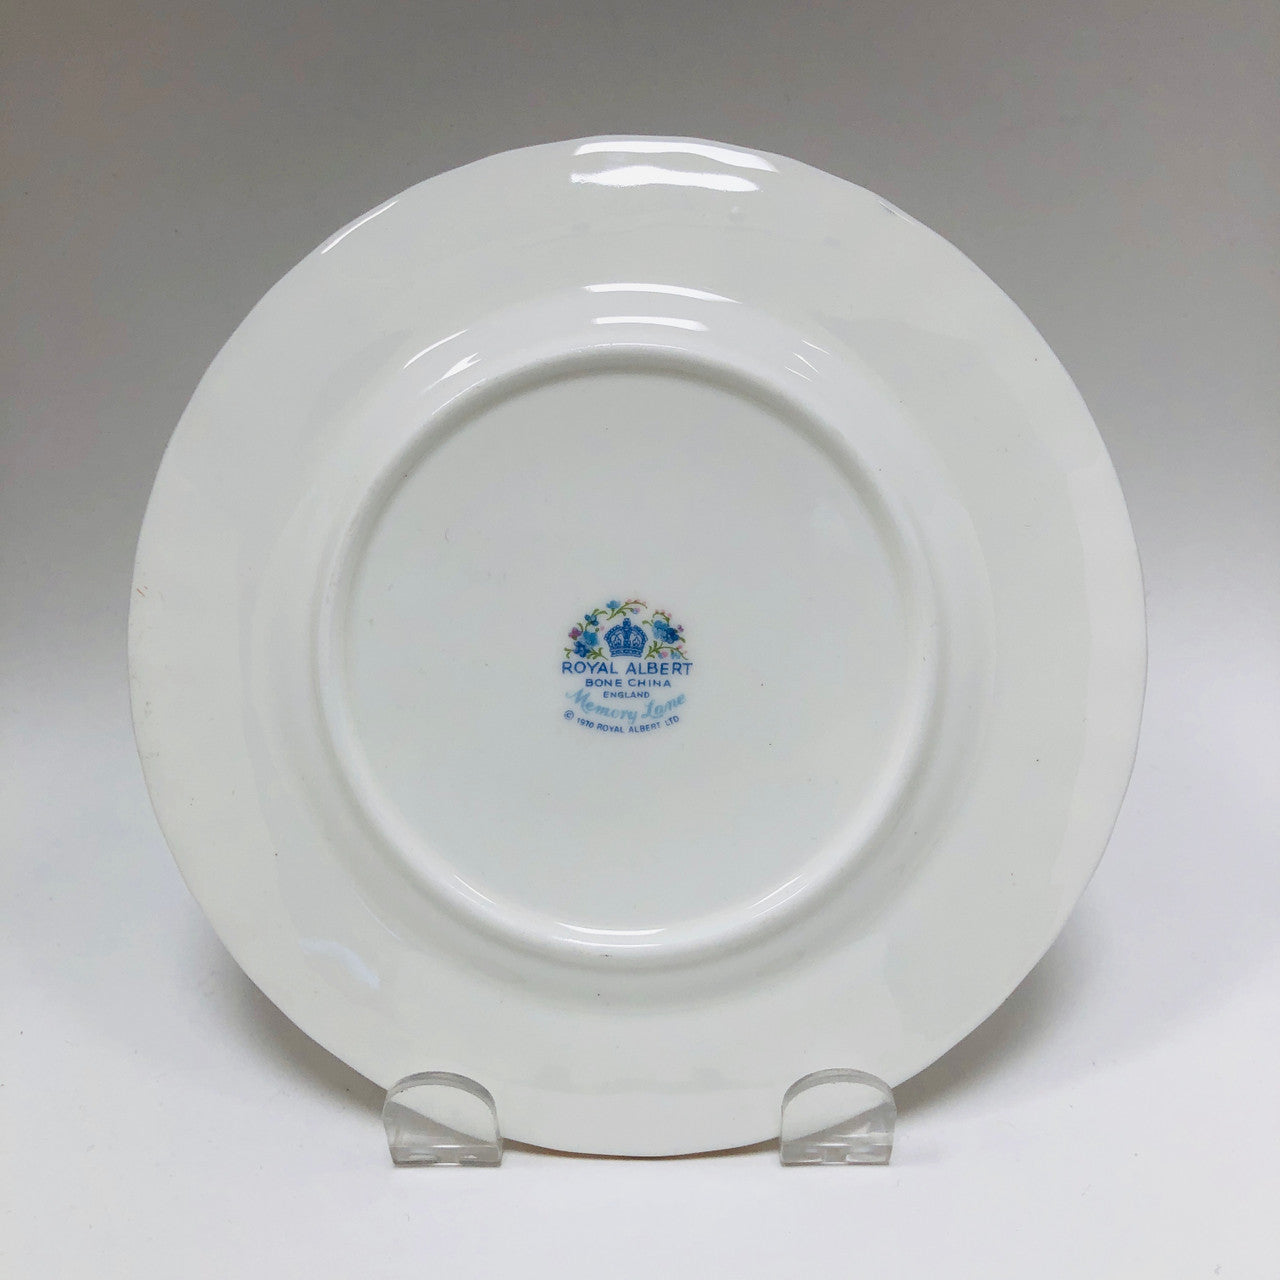 Royal Albert, Memory Lane, Bread and Butter, Plate, Handled, Vintage, England, Bone China, Steampunk